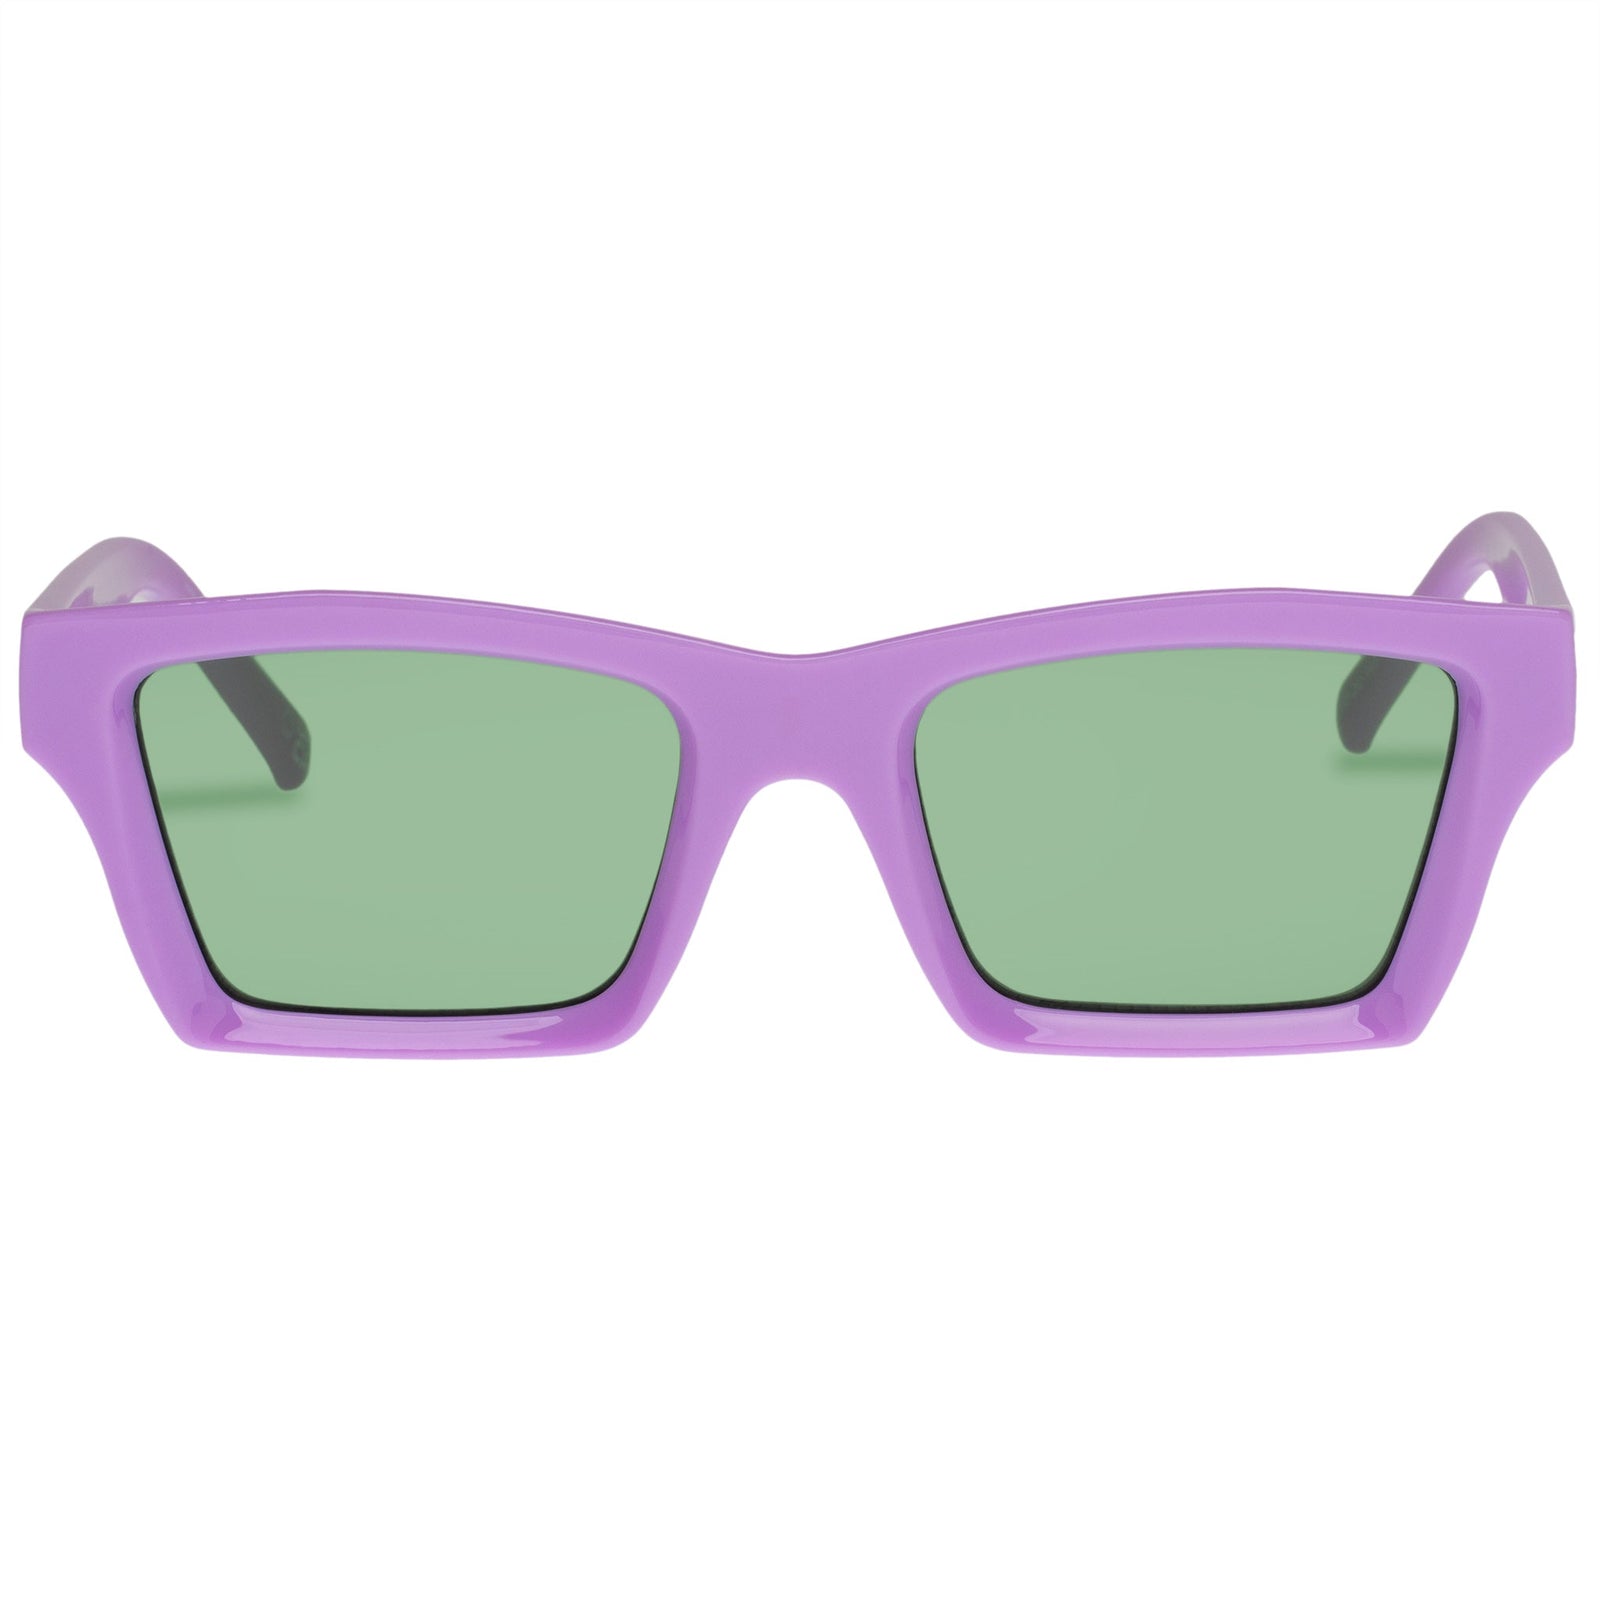 Big Square Faceted Geometric Sunglasses Man Woman Pink Gold Frame